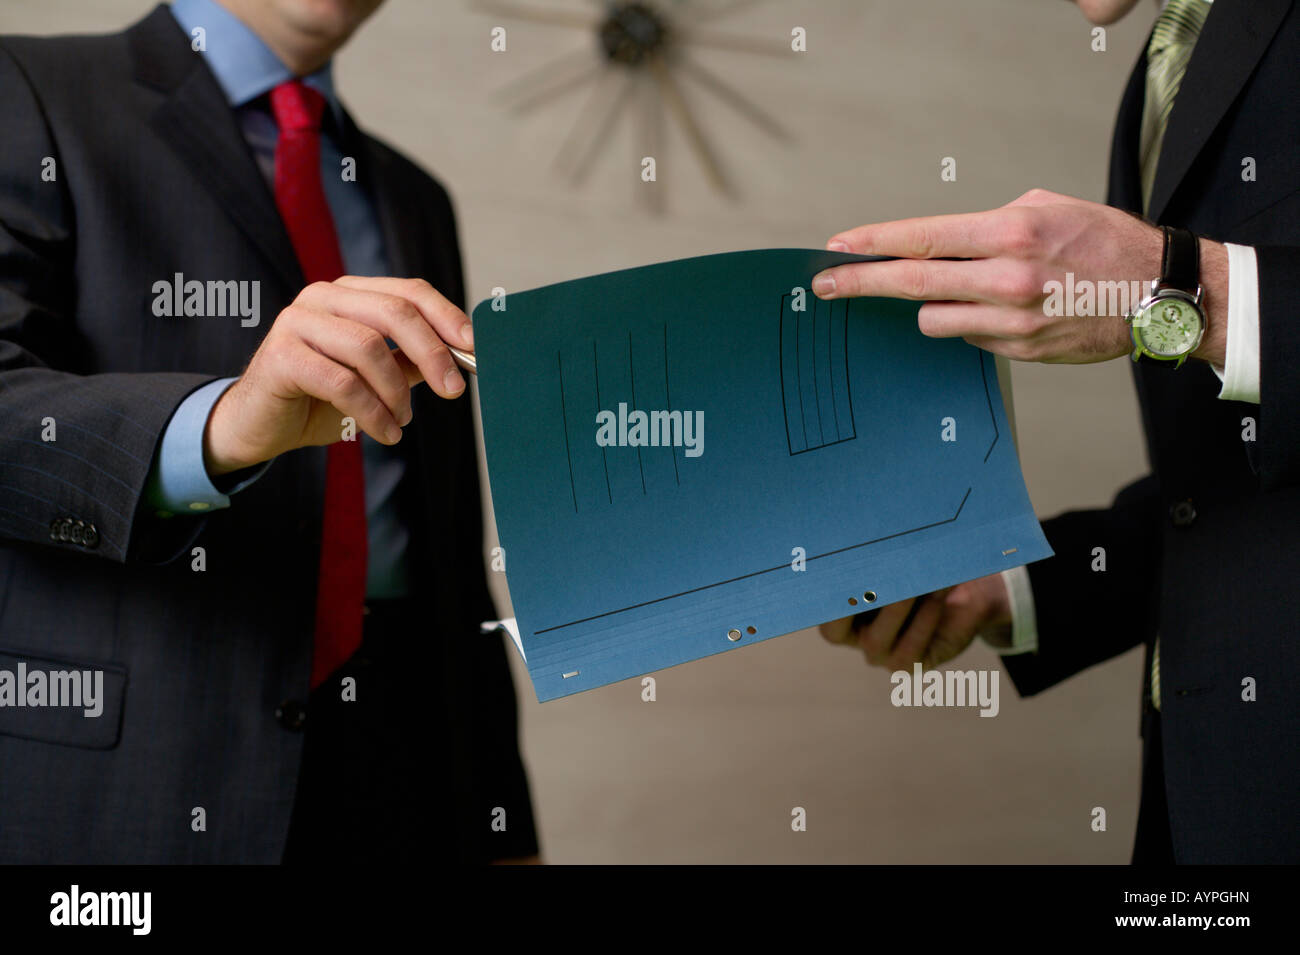 Two businessman standing in an office, handing over documents Stock Photo